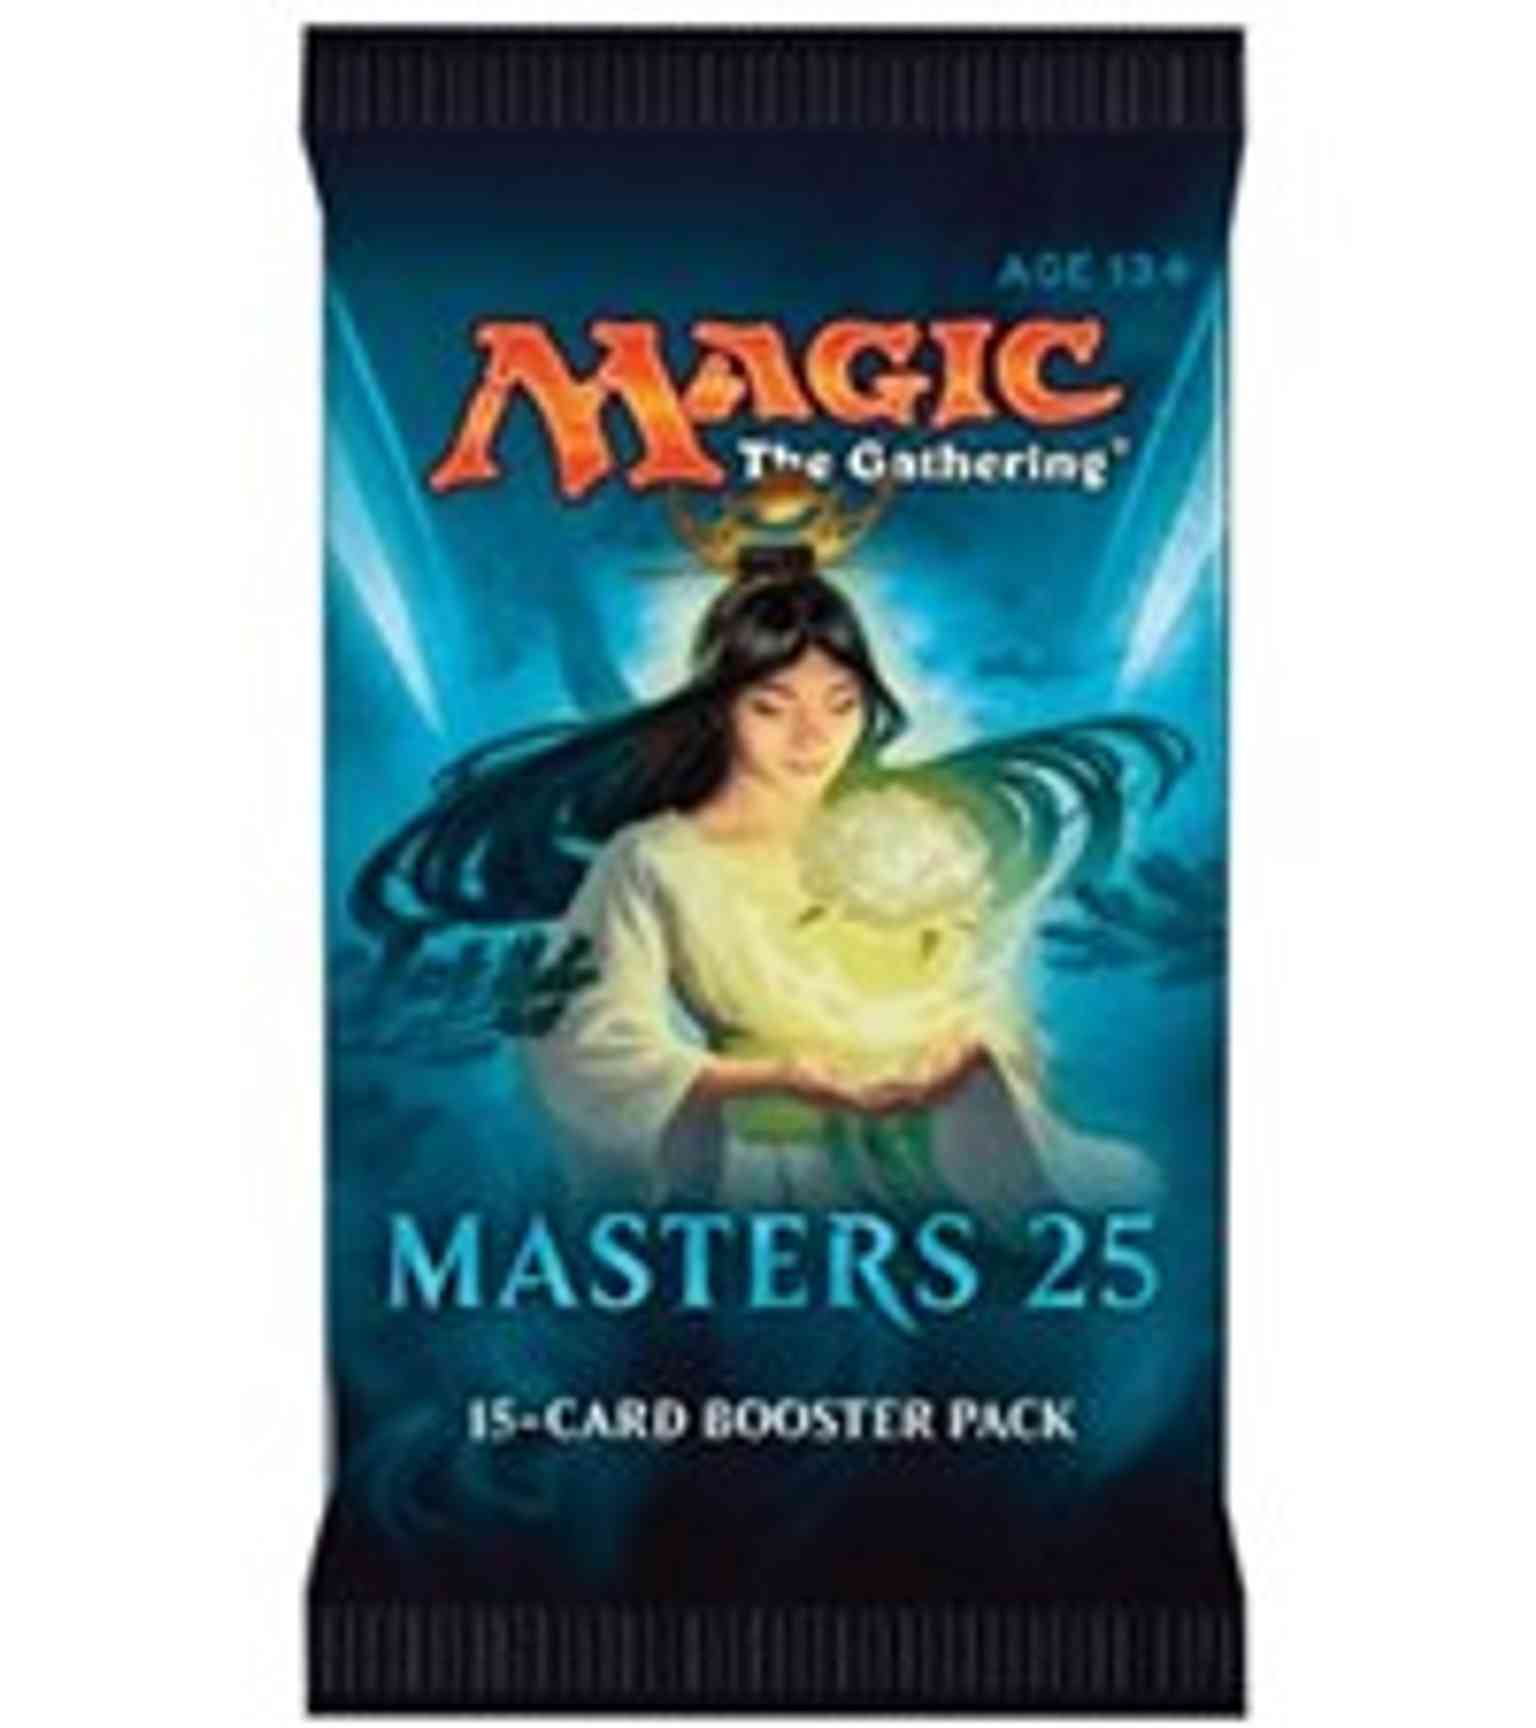 Masters 25 - Booster Pack magic card front